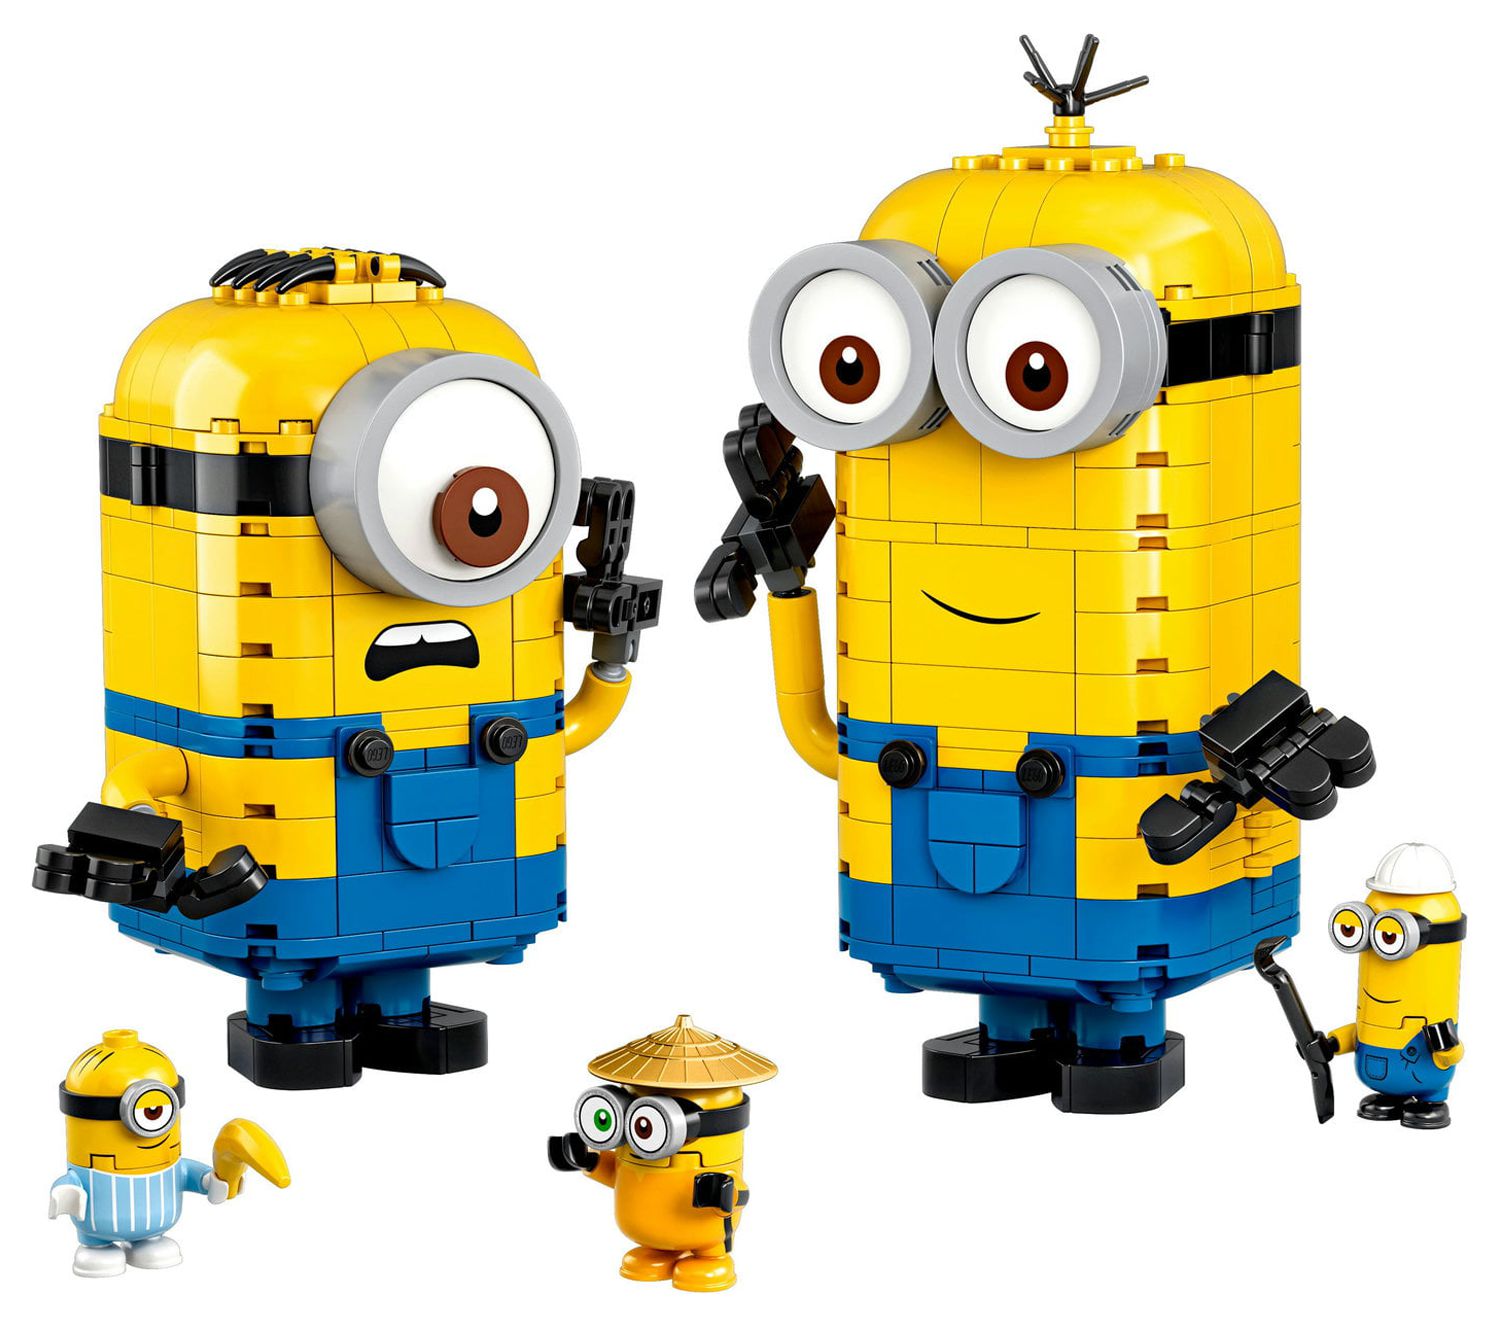 LEGO Minions: Brick-Built Minions and Their Lair (75551) Building Kit for Kids, Great Birthday Present for Kids Who Love Minion Toys and Kevin, Bob and Stuart Minion Characters (876 Pieces) - image 5 of 5